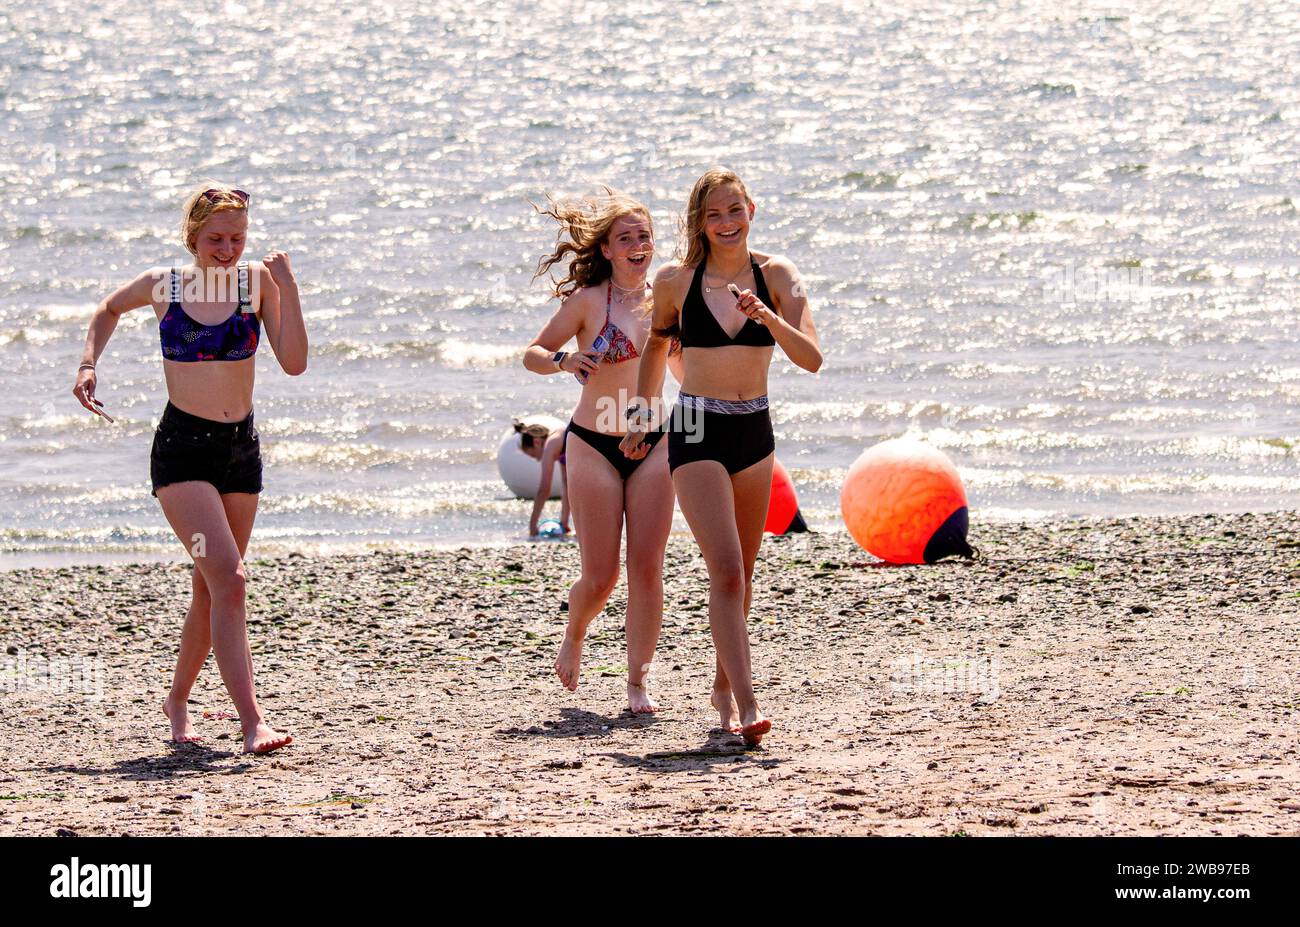 During the hot summer weather, young women are having fun along Broughty Ferry beach in Dundee in Scotland, UK Stock Photo